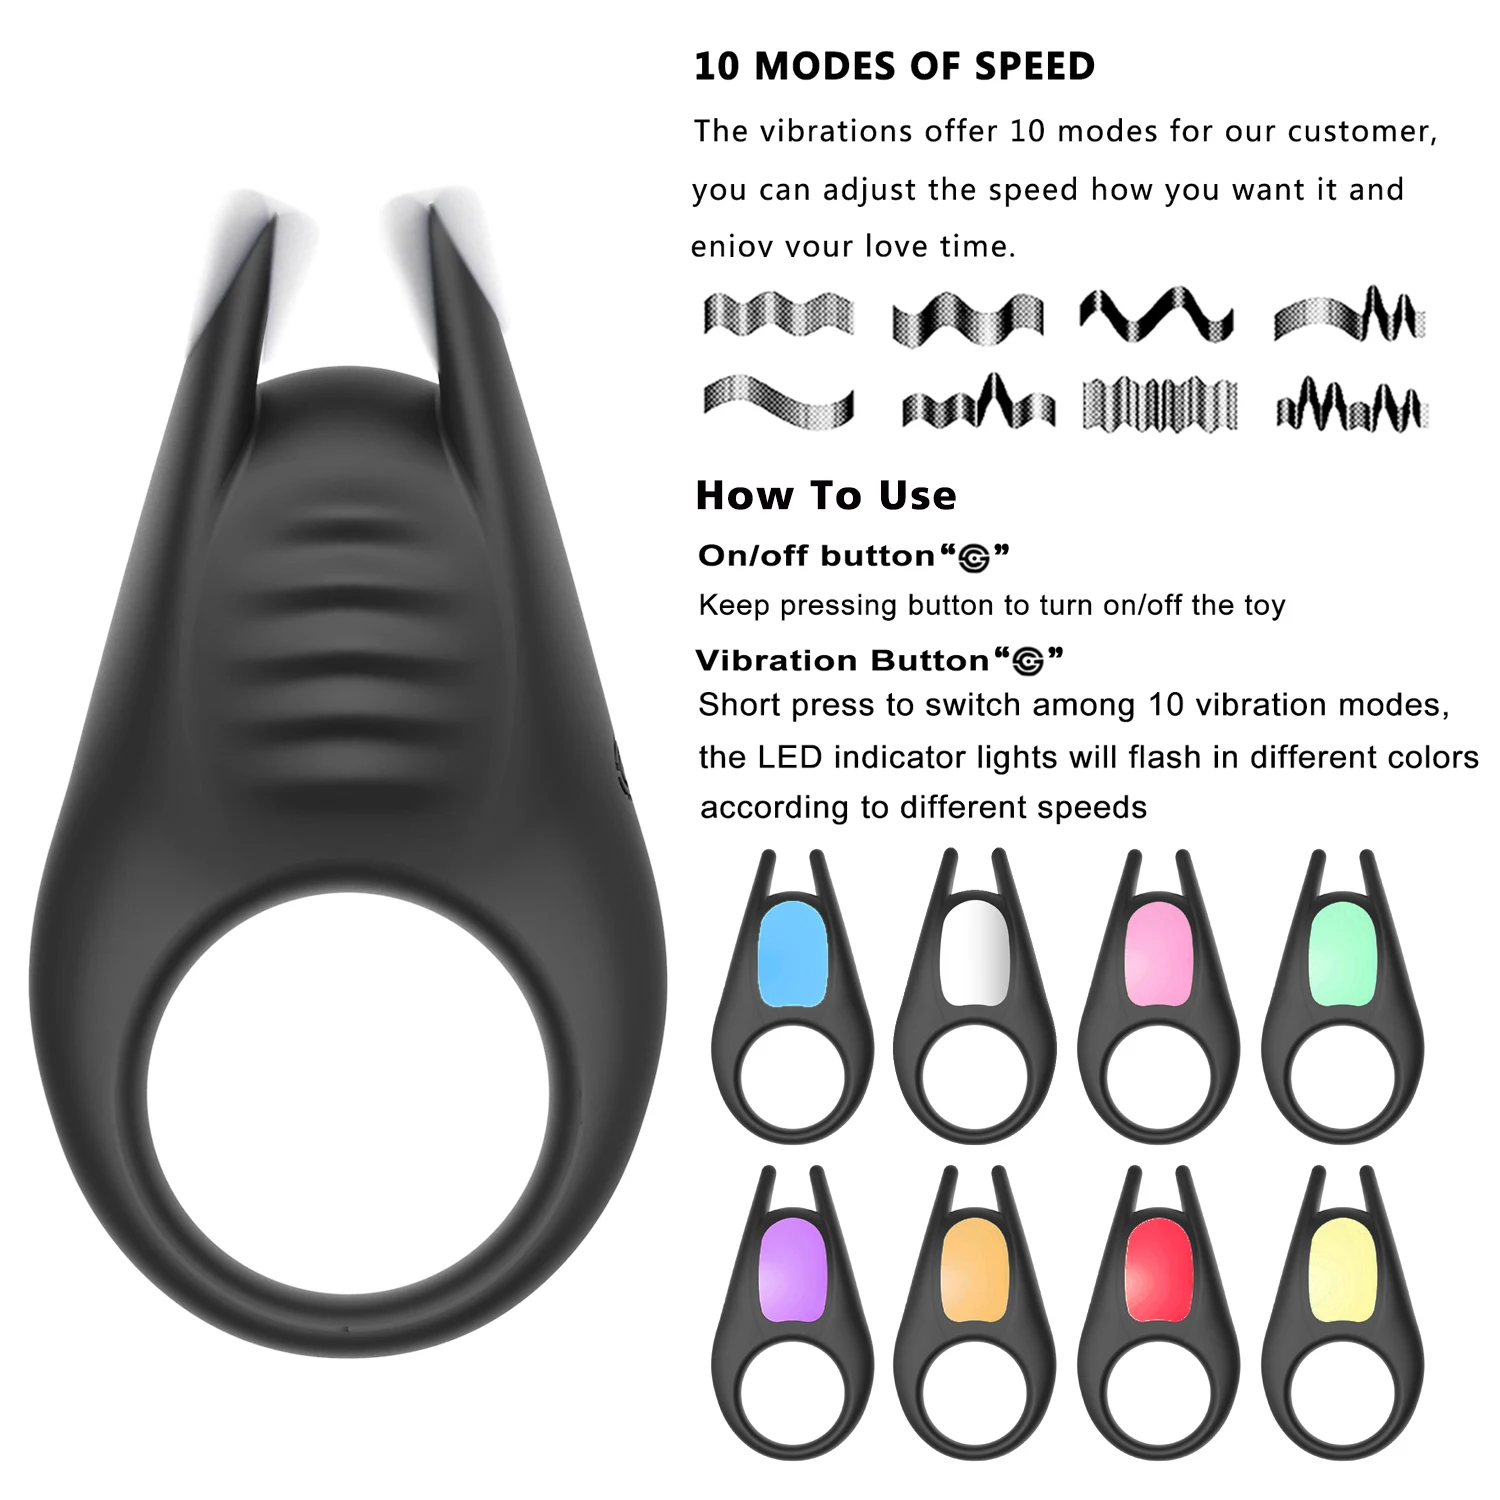 
Luxury Sex Toy High Quality Silicone Rechargeable Vibrating Male Delay Ejaculation Penis Cock Ring 